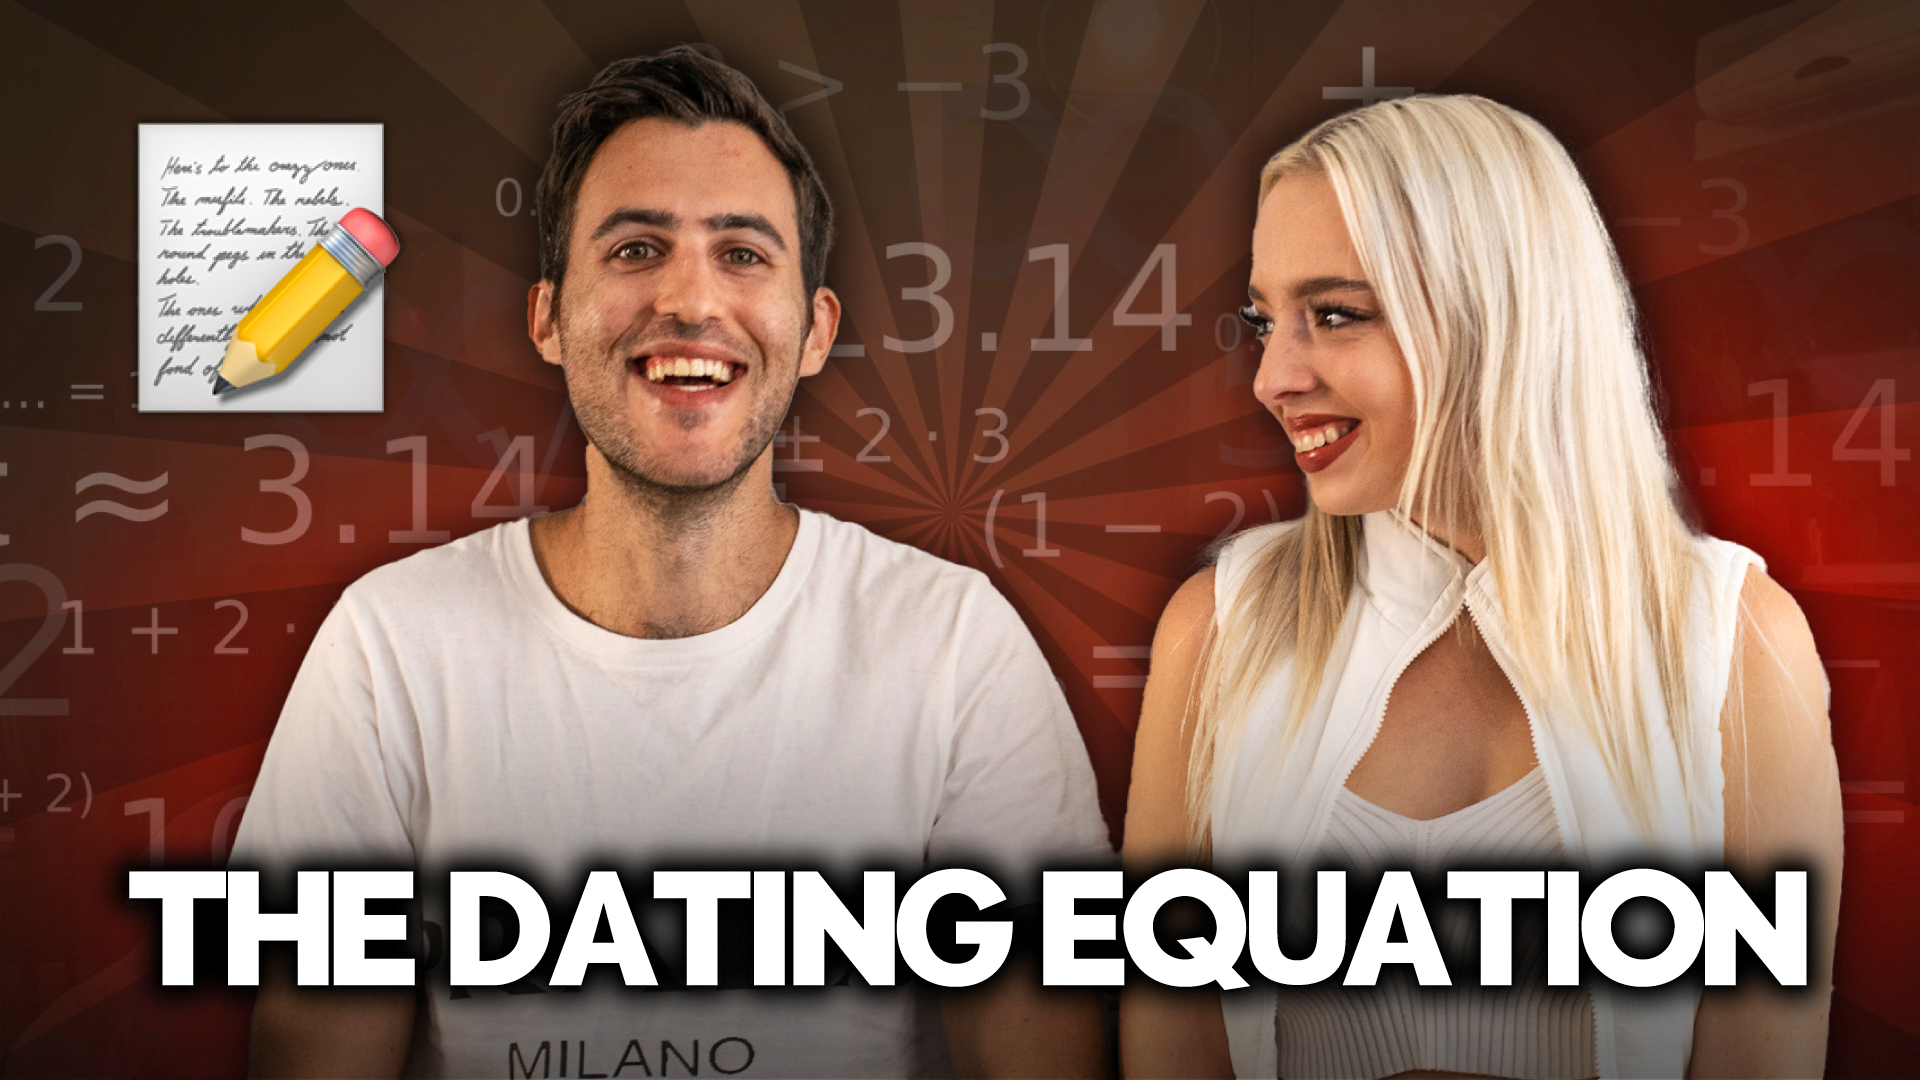 The dating equation for men in 2023